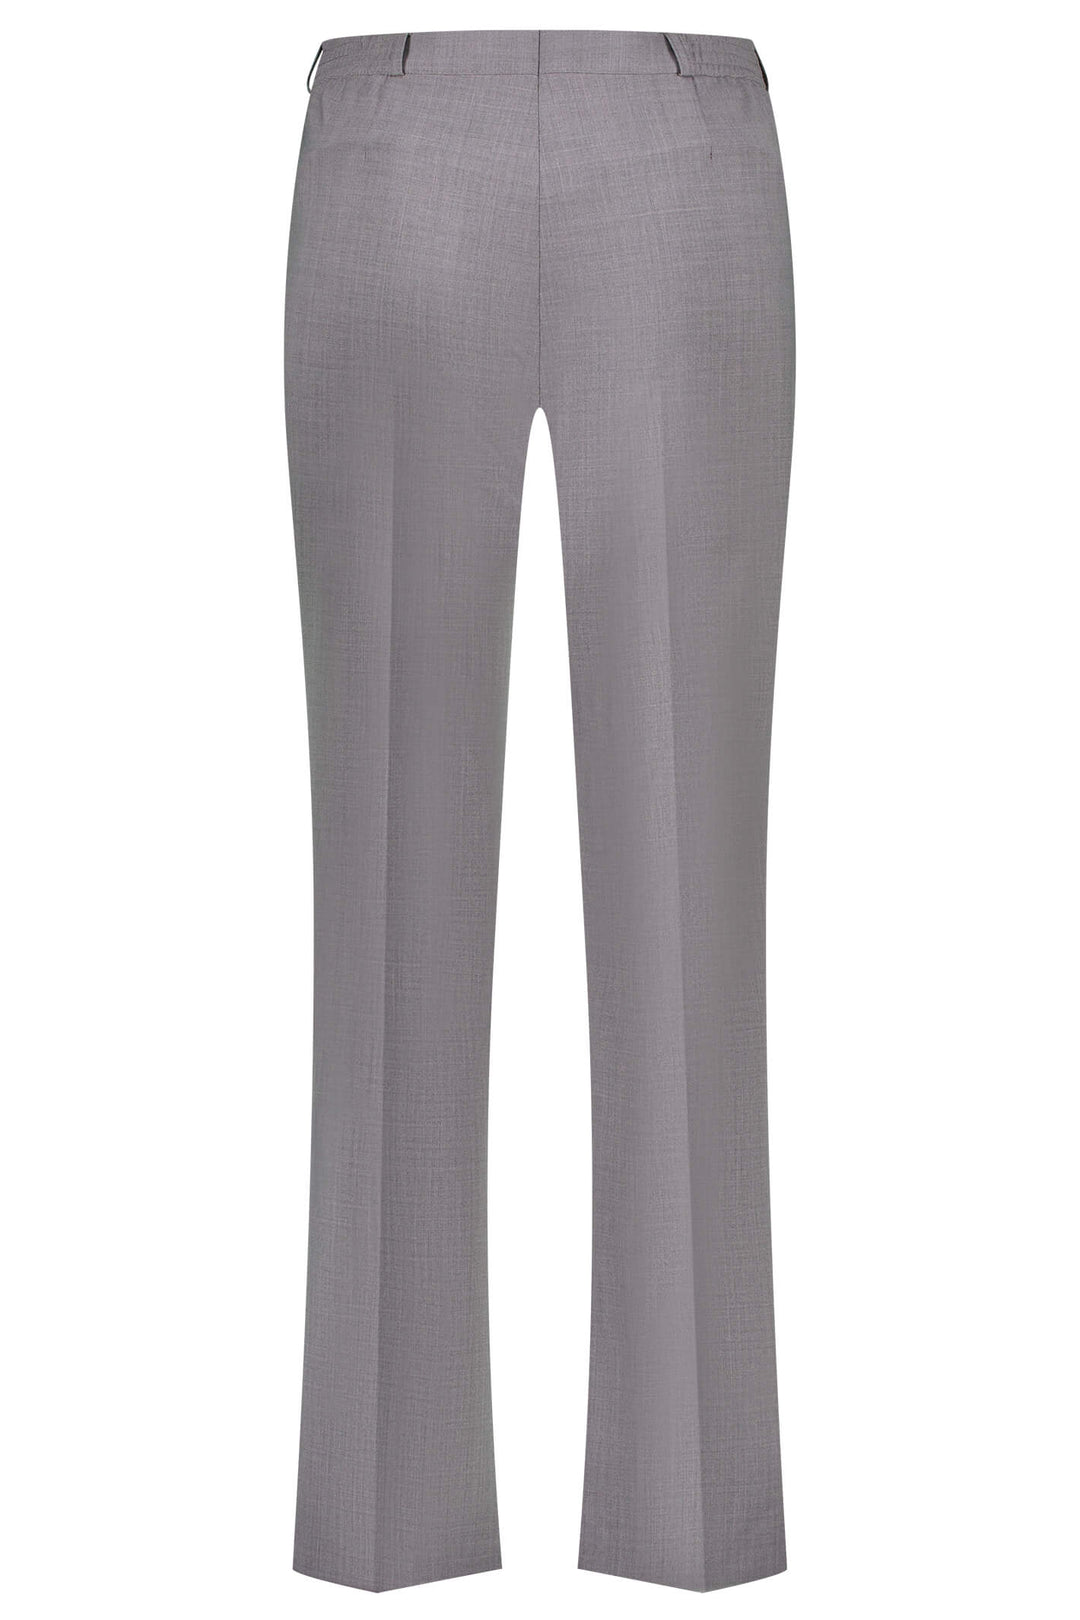 Zerres Anika 1303-983 97 Grey Wool Blend Stretch City Trousers - Shirley Allum Boutique